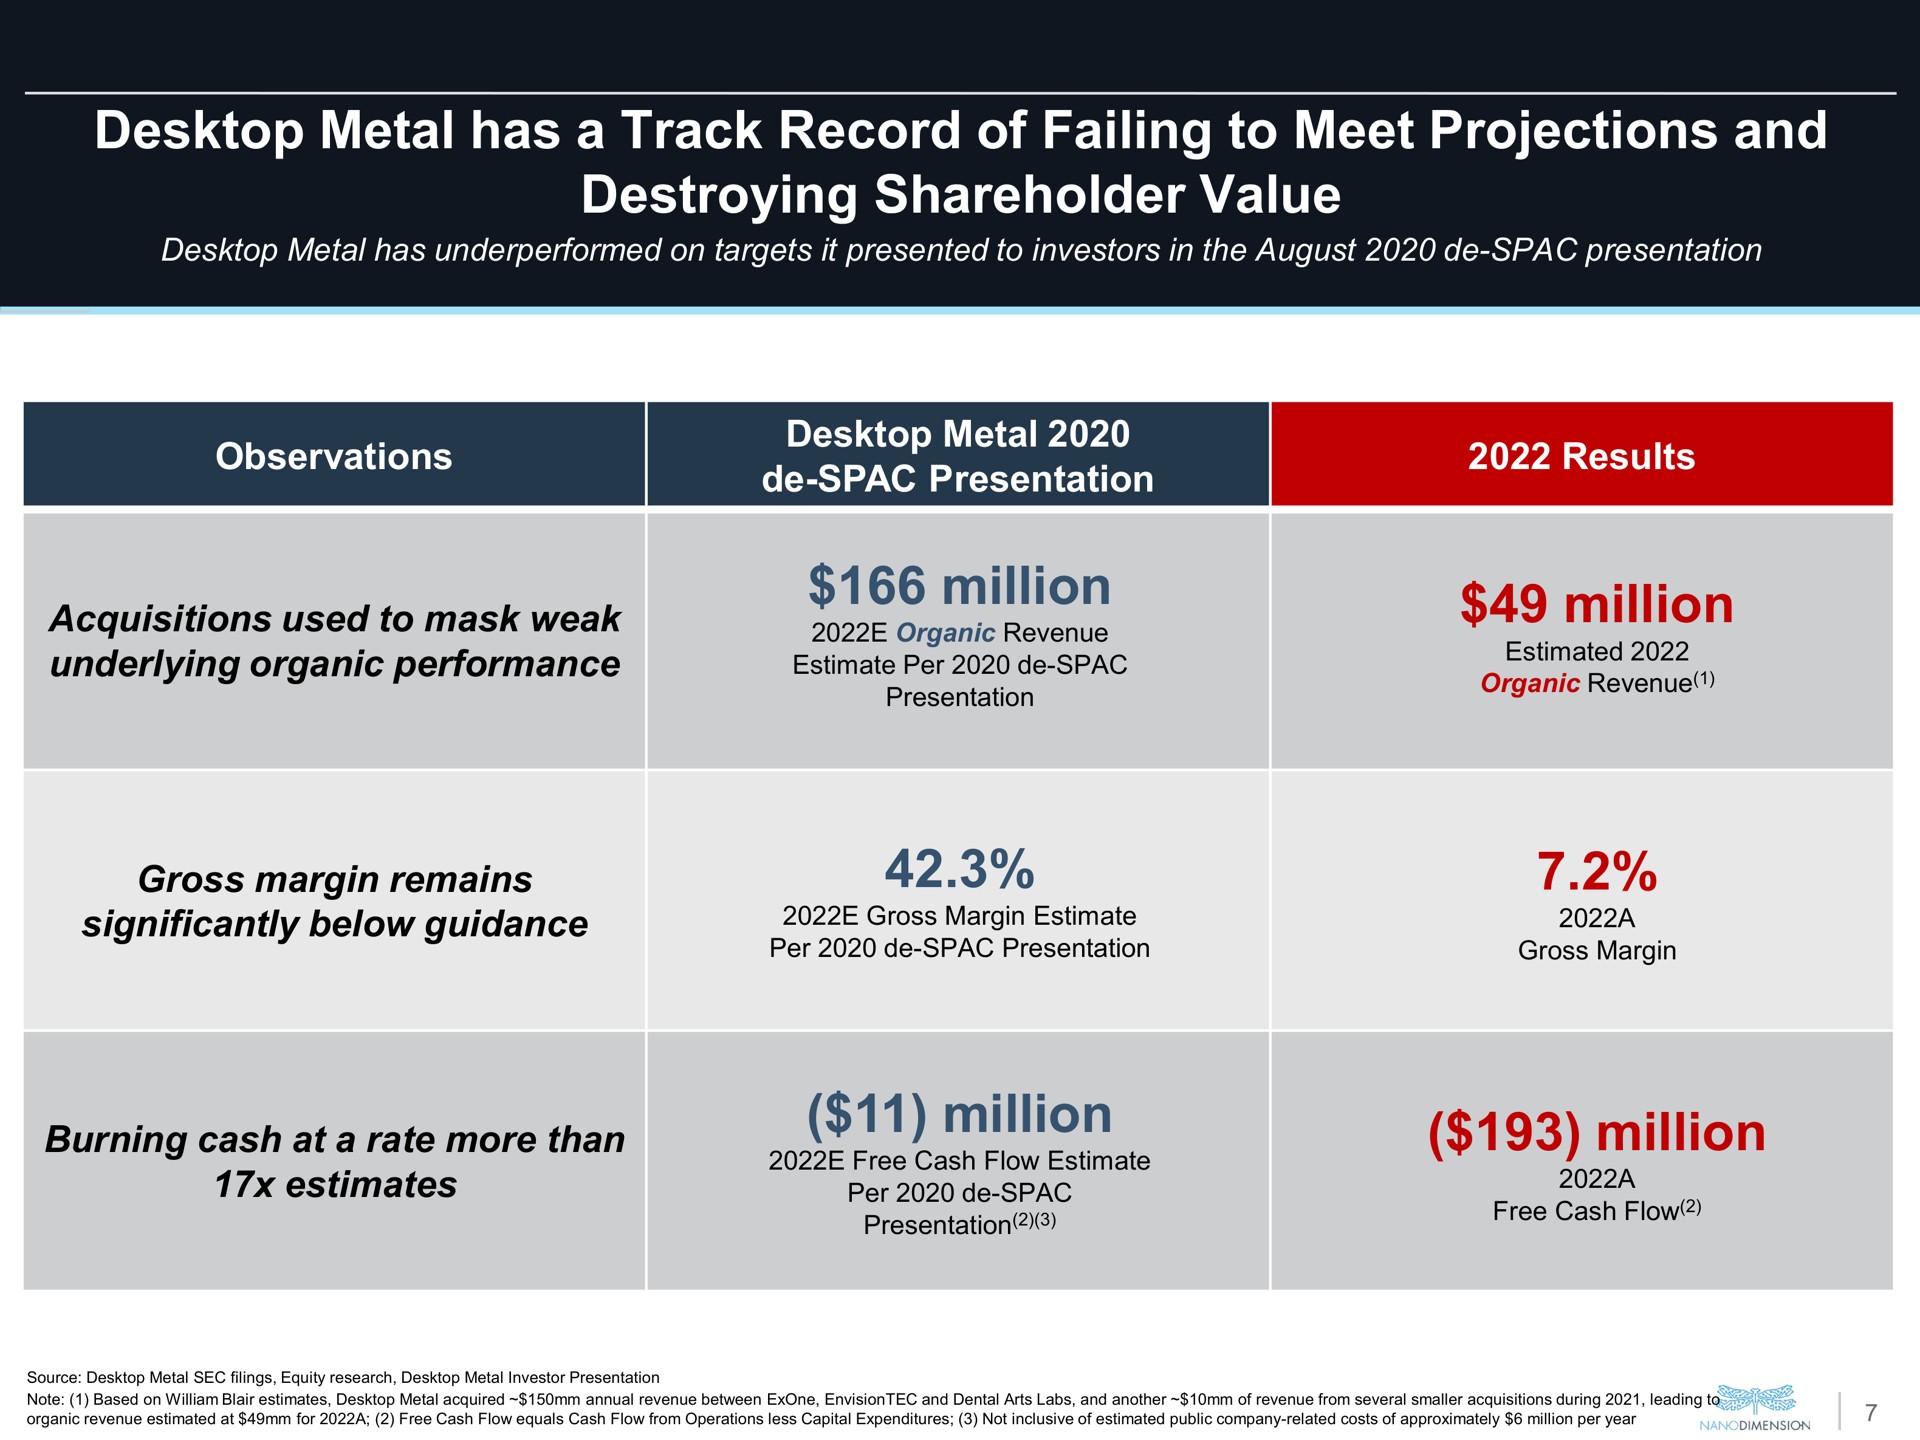 metal has a track record of failing to meet projections and destroying shareholder value million million million million burning cash at rate more than estimates per | Nano Dimension